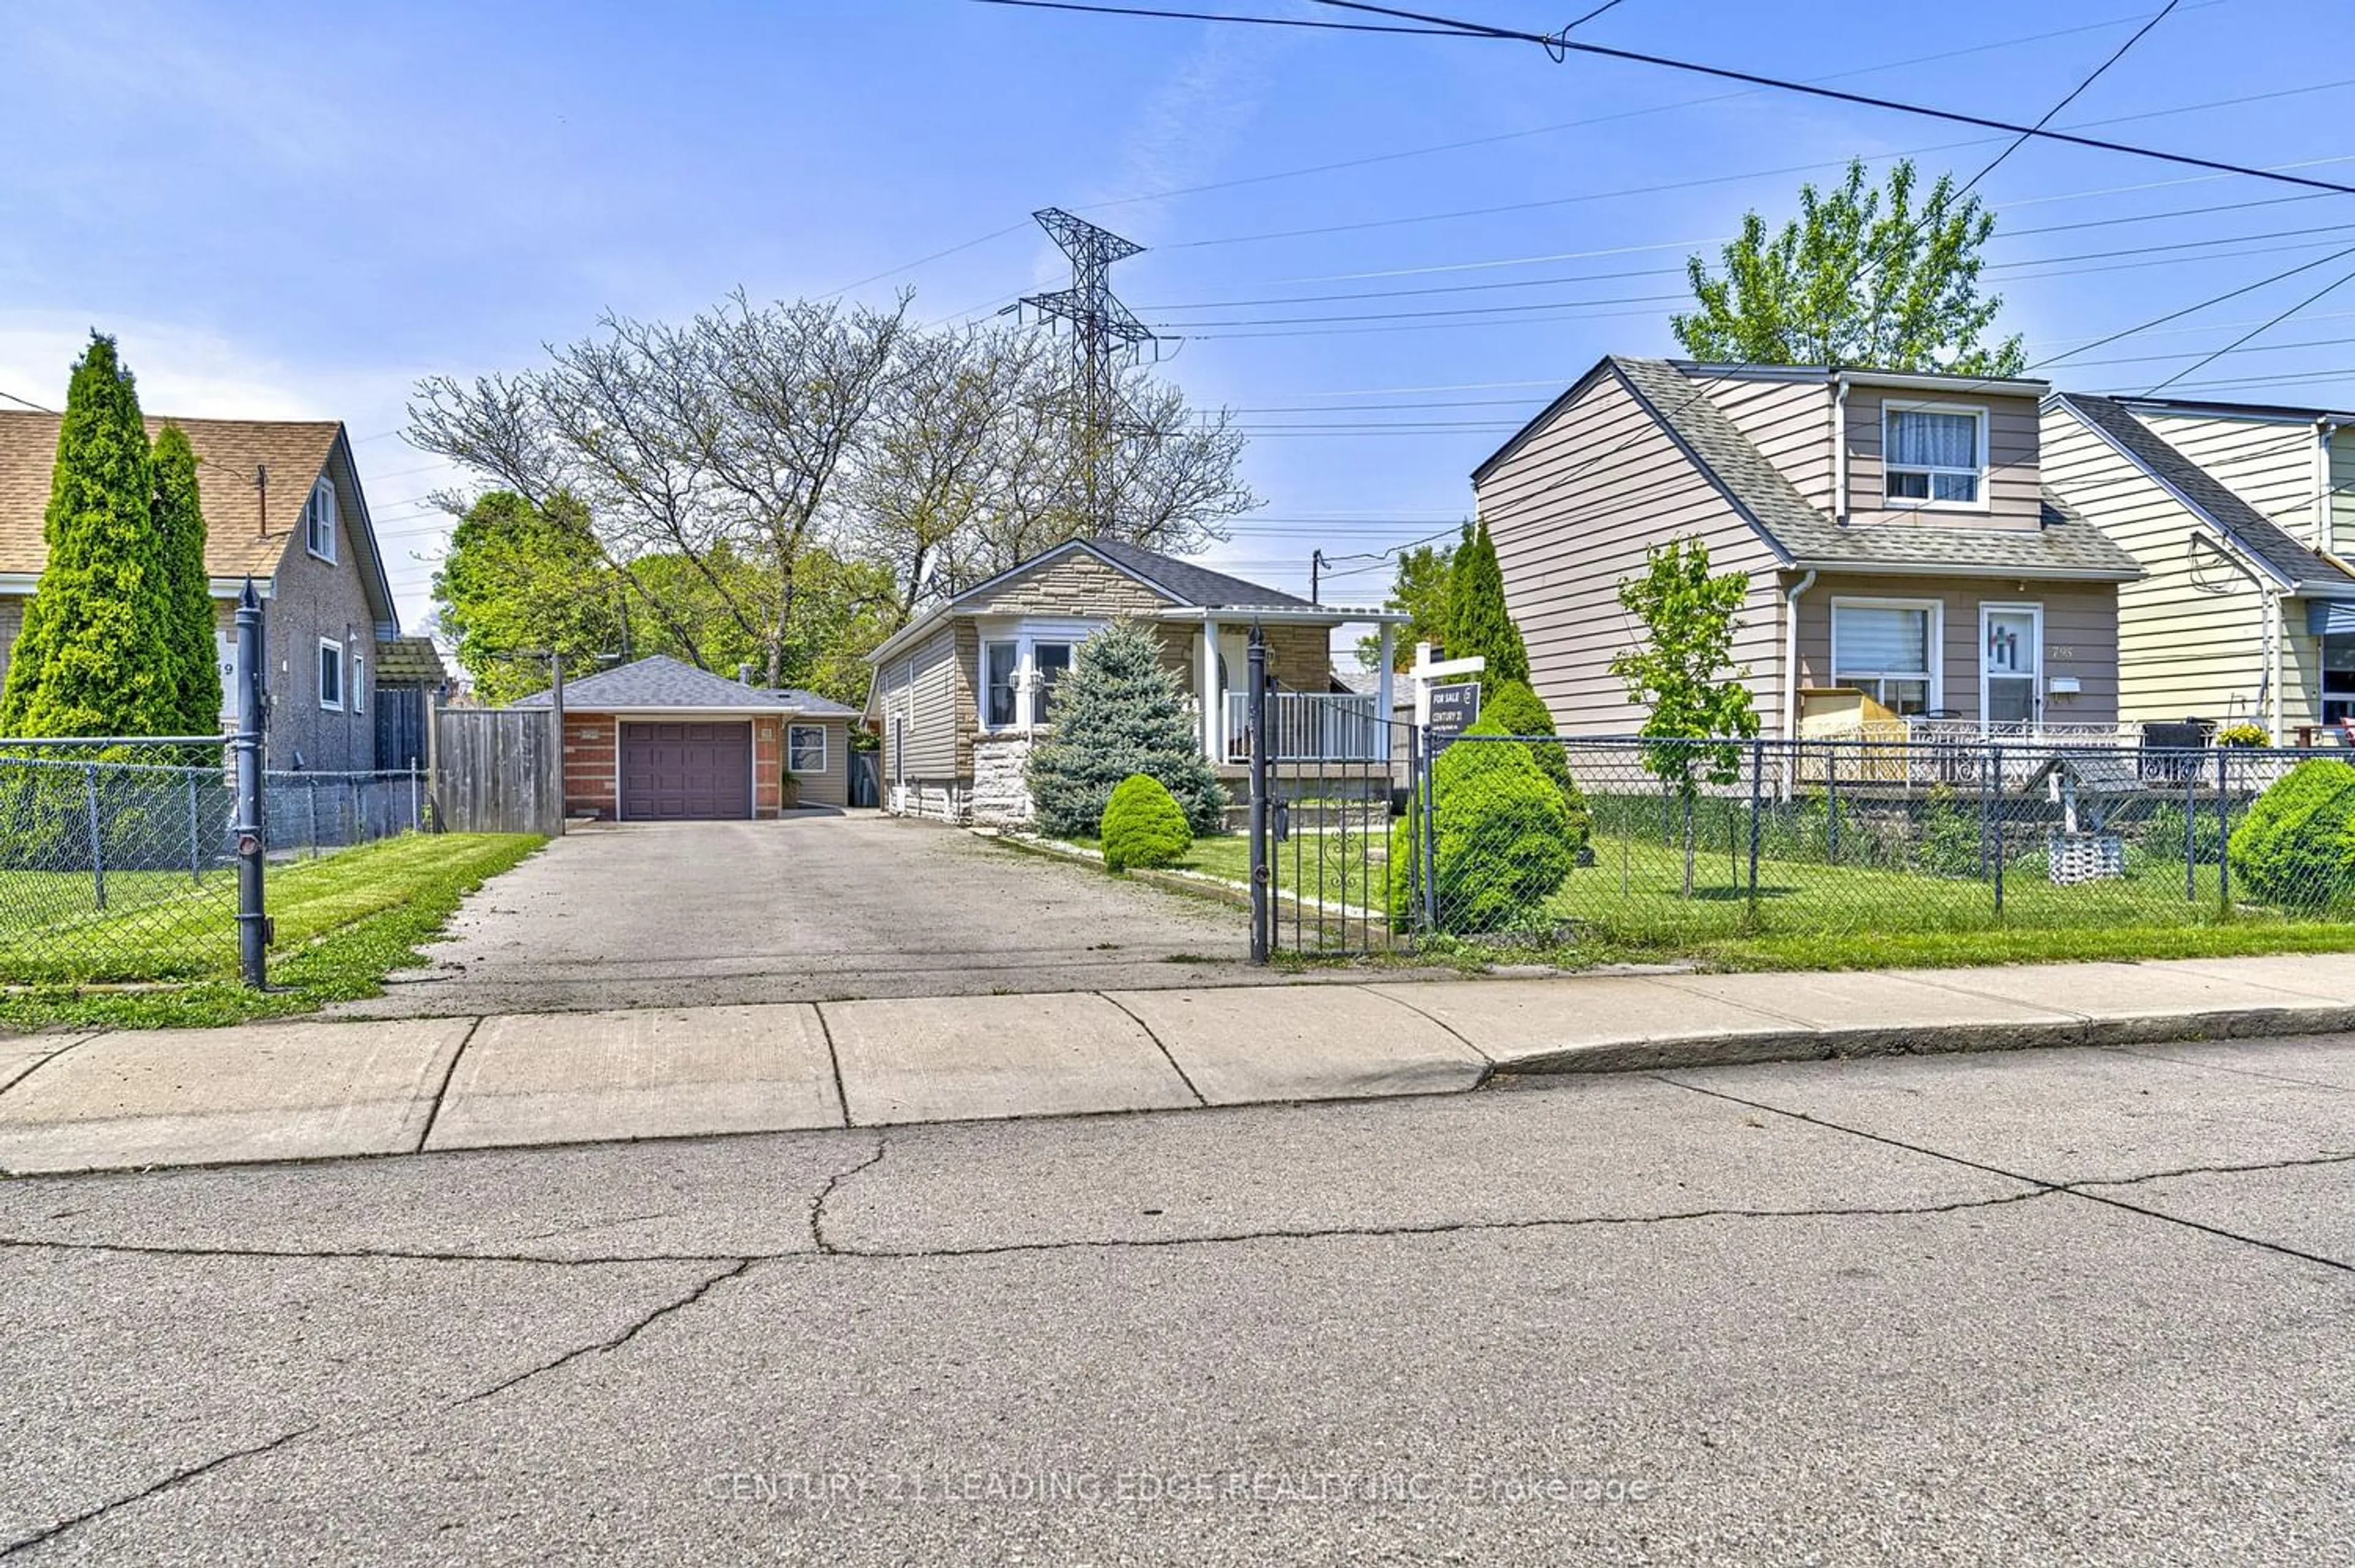 Street view for 793 Tate Ave, Hamilton Ontario L8H 6M1